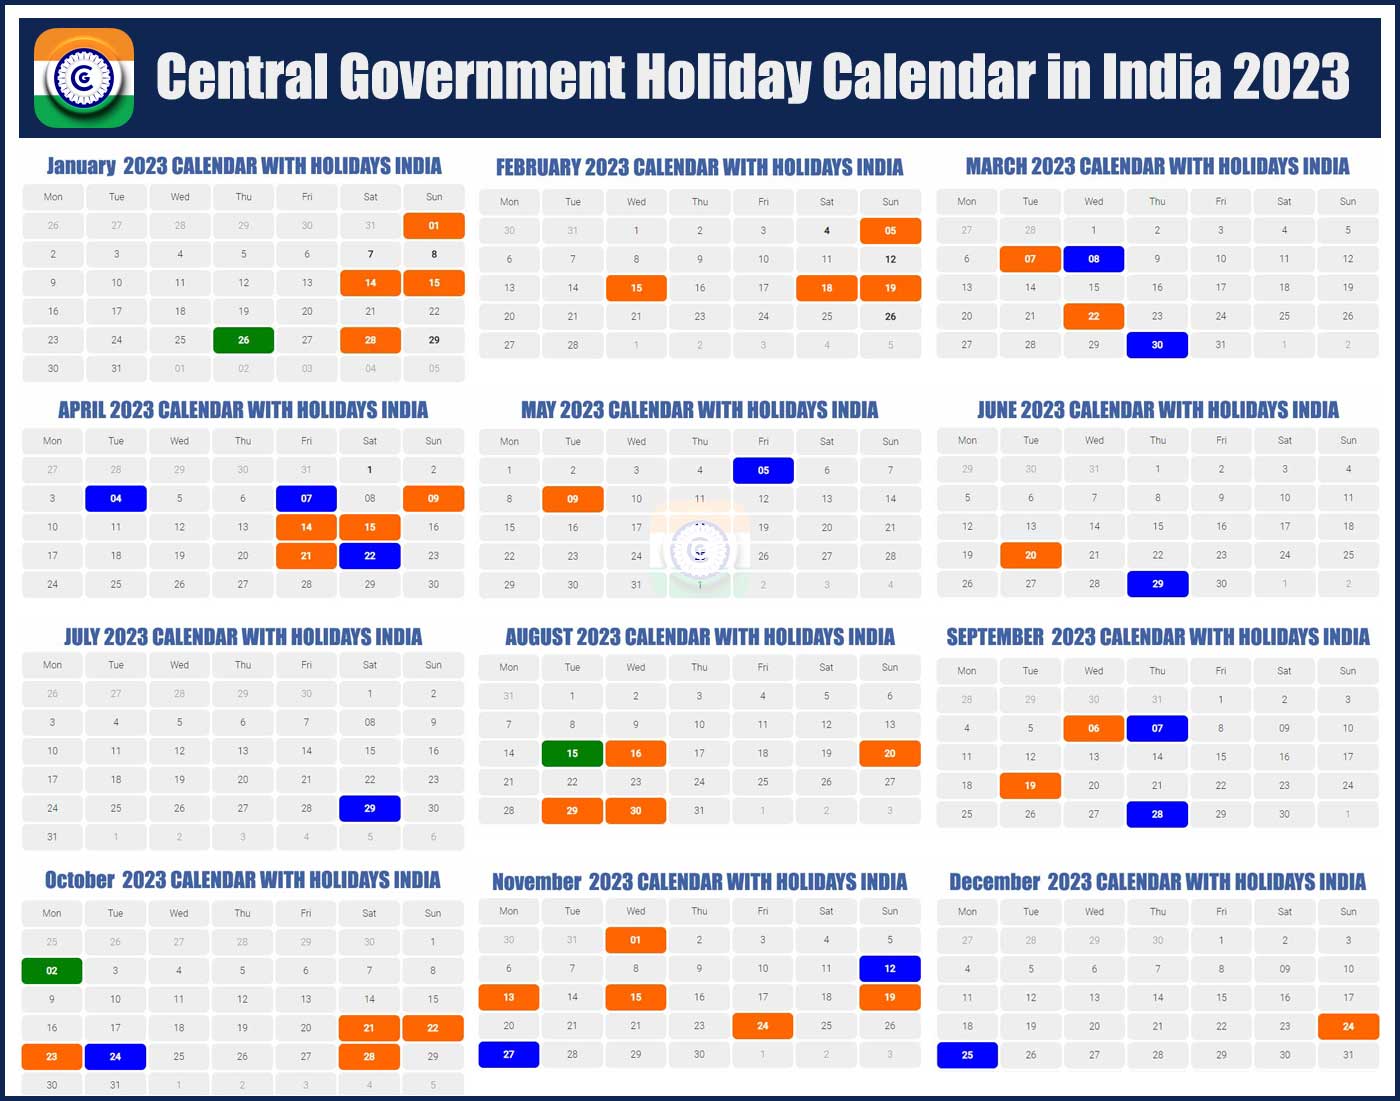 Government holiday calendar 2023 | Government holidays 2023 India | list of govt holidays 2023 | Central government holiday list 2023